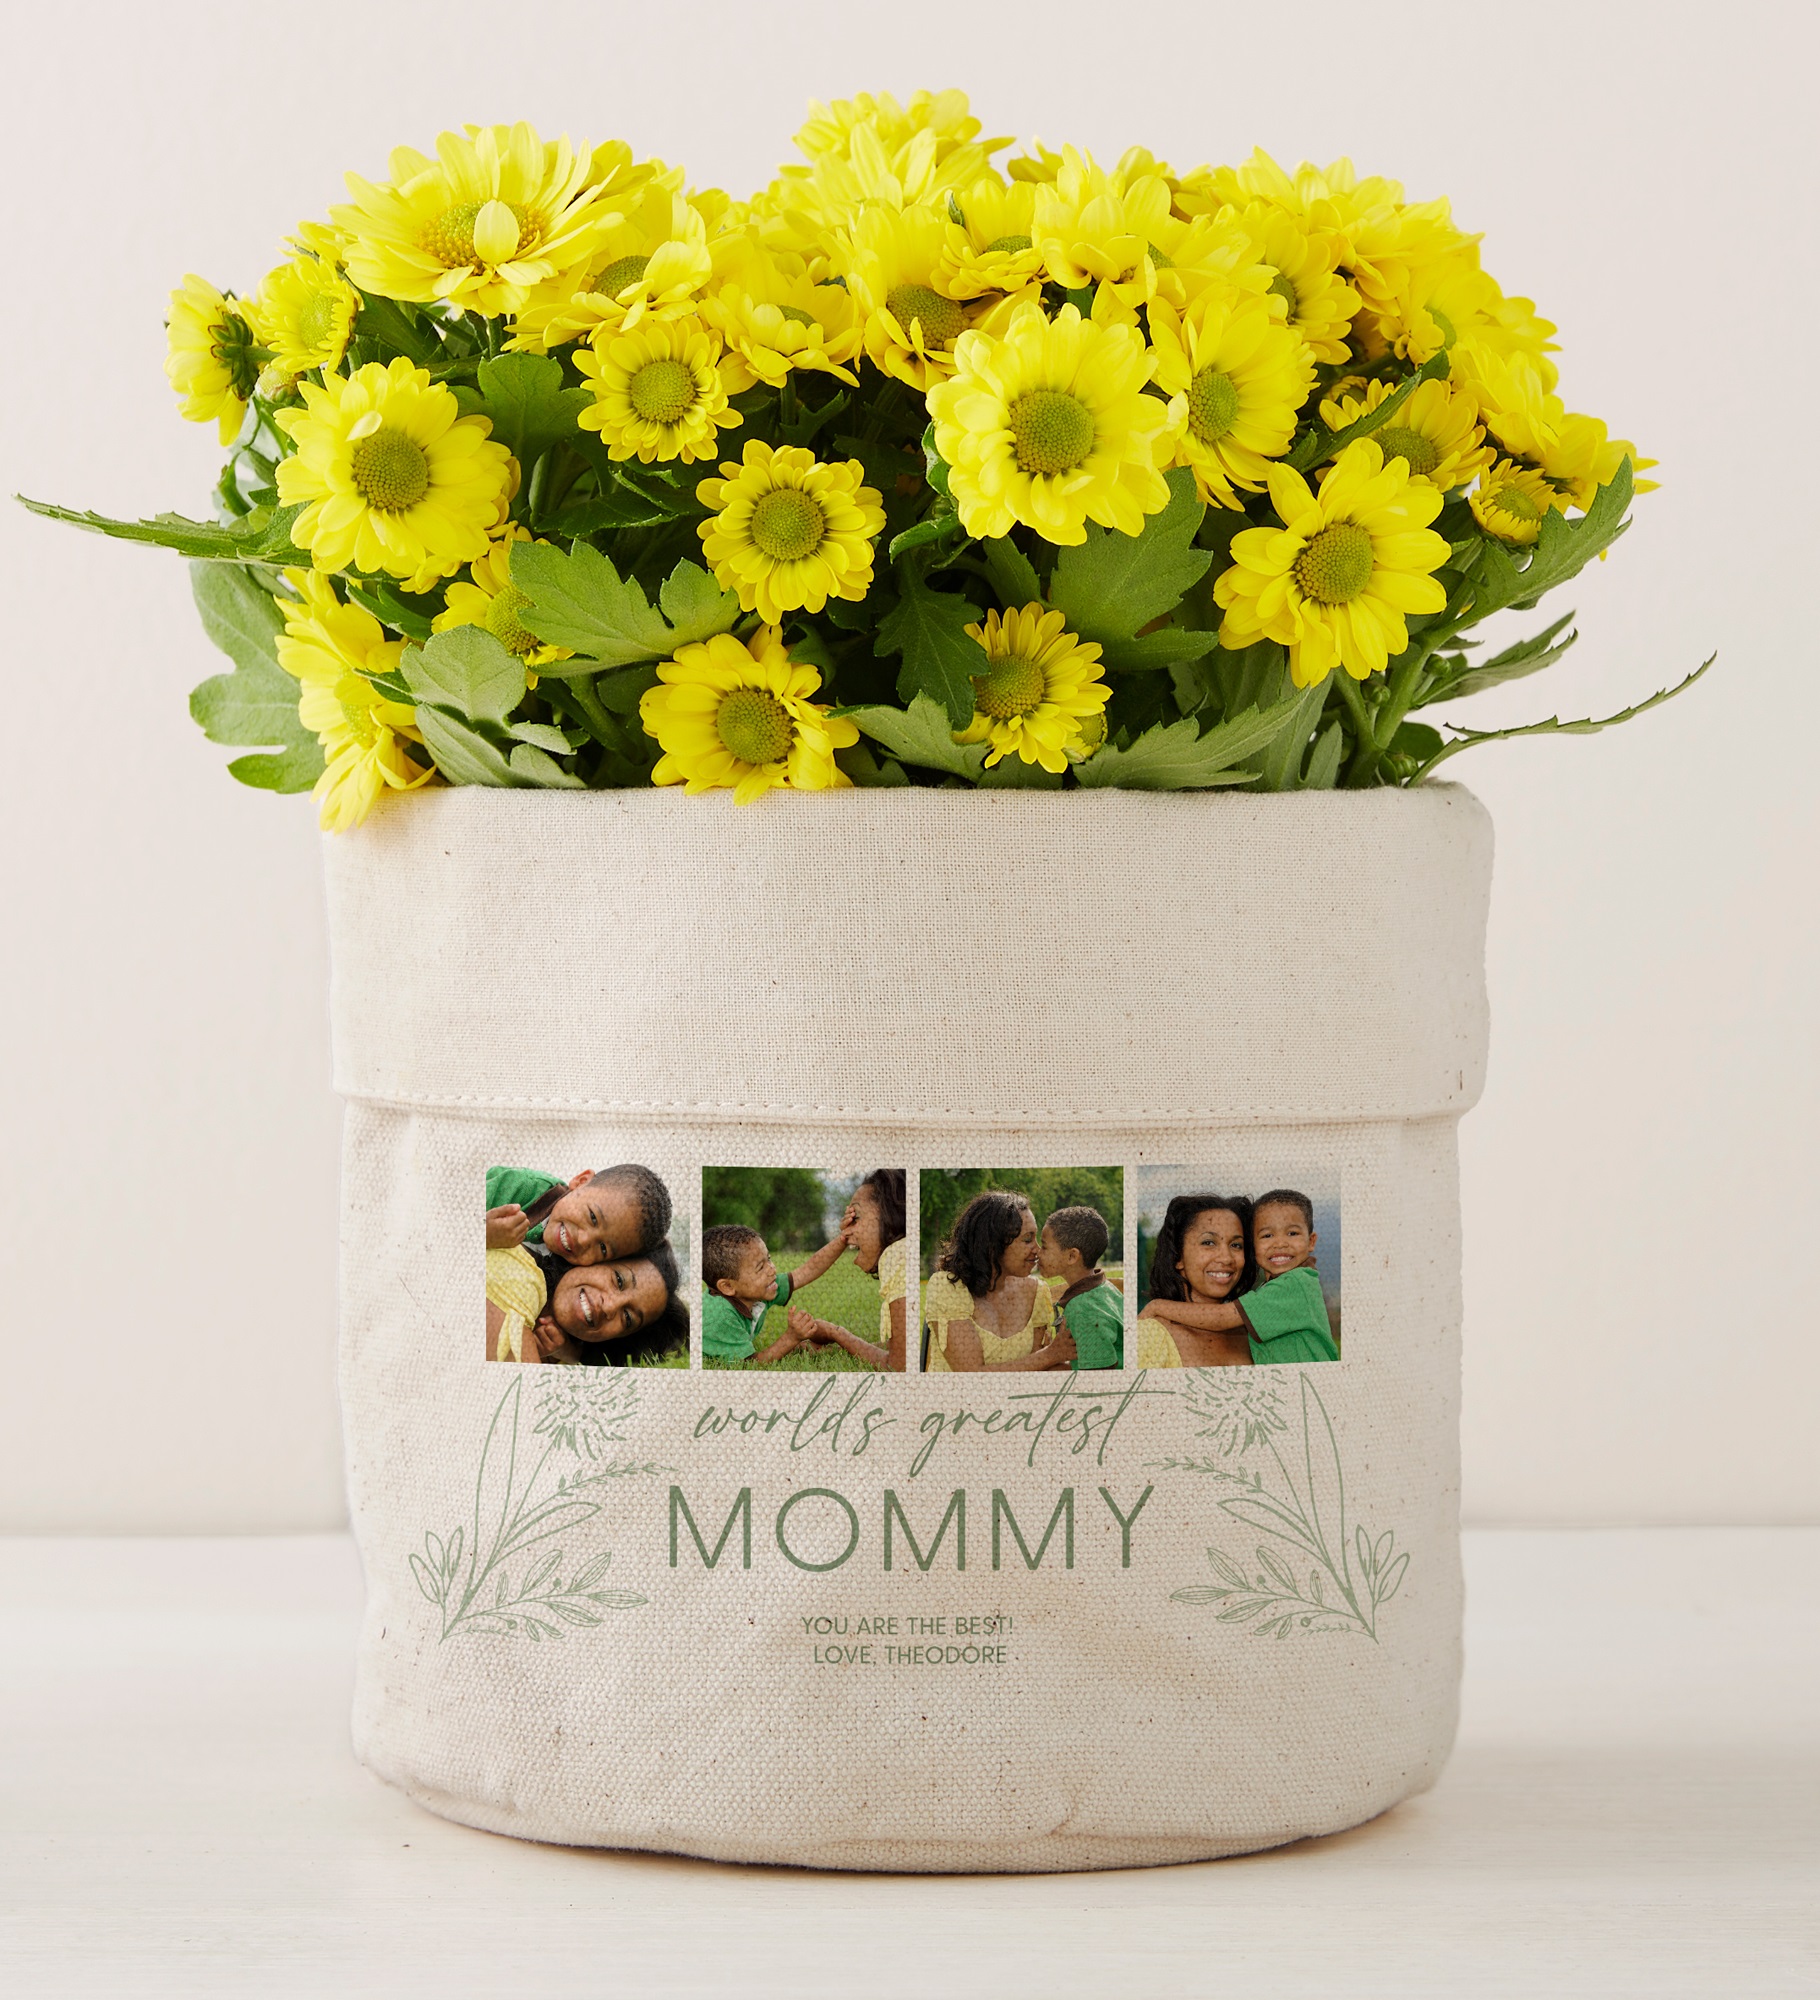 Her Memories Photo Collage Personalized Canvas Flower Planter